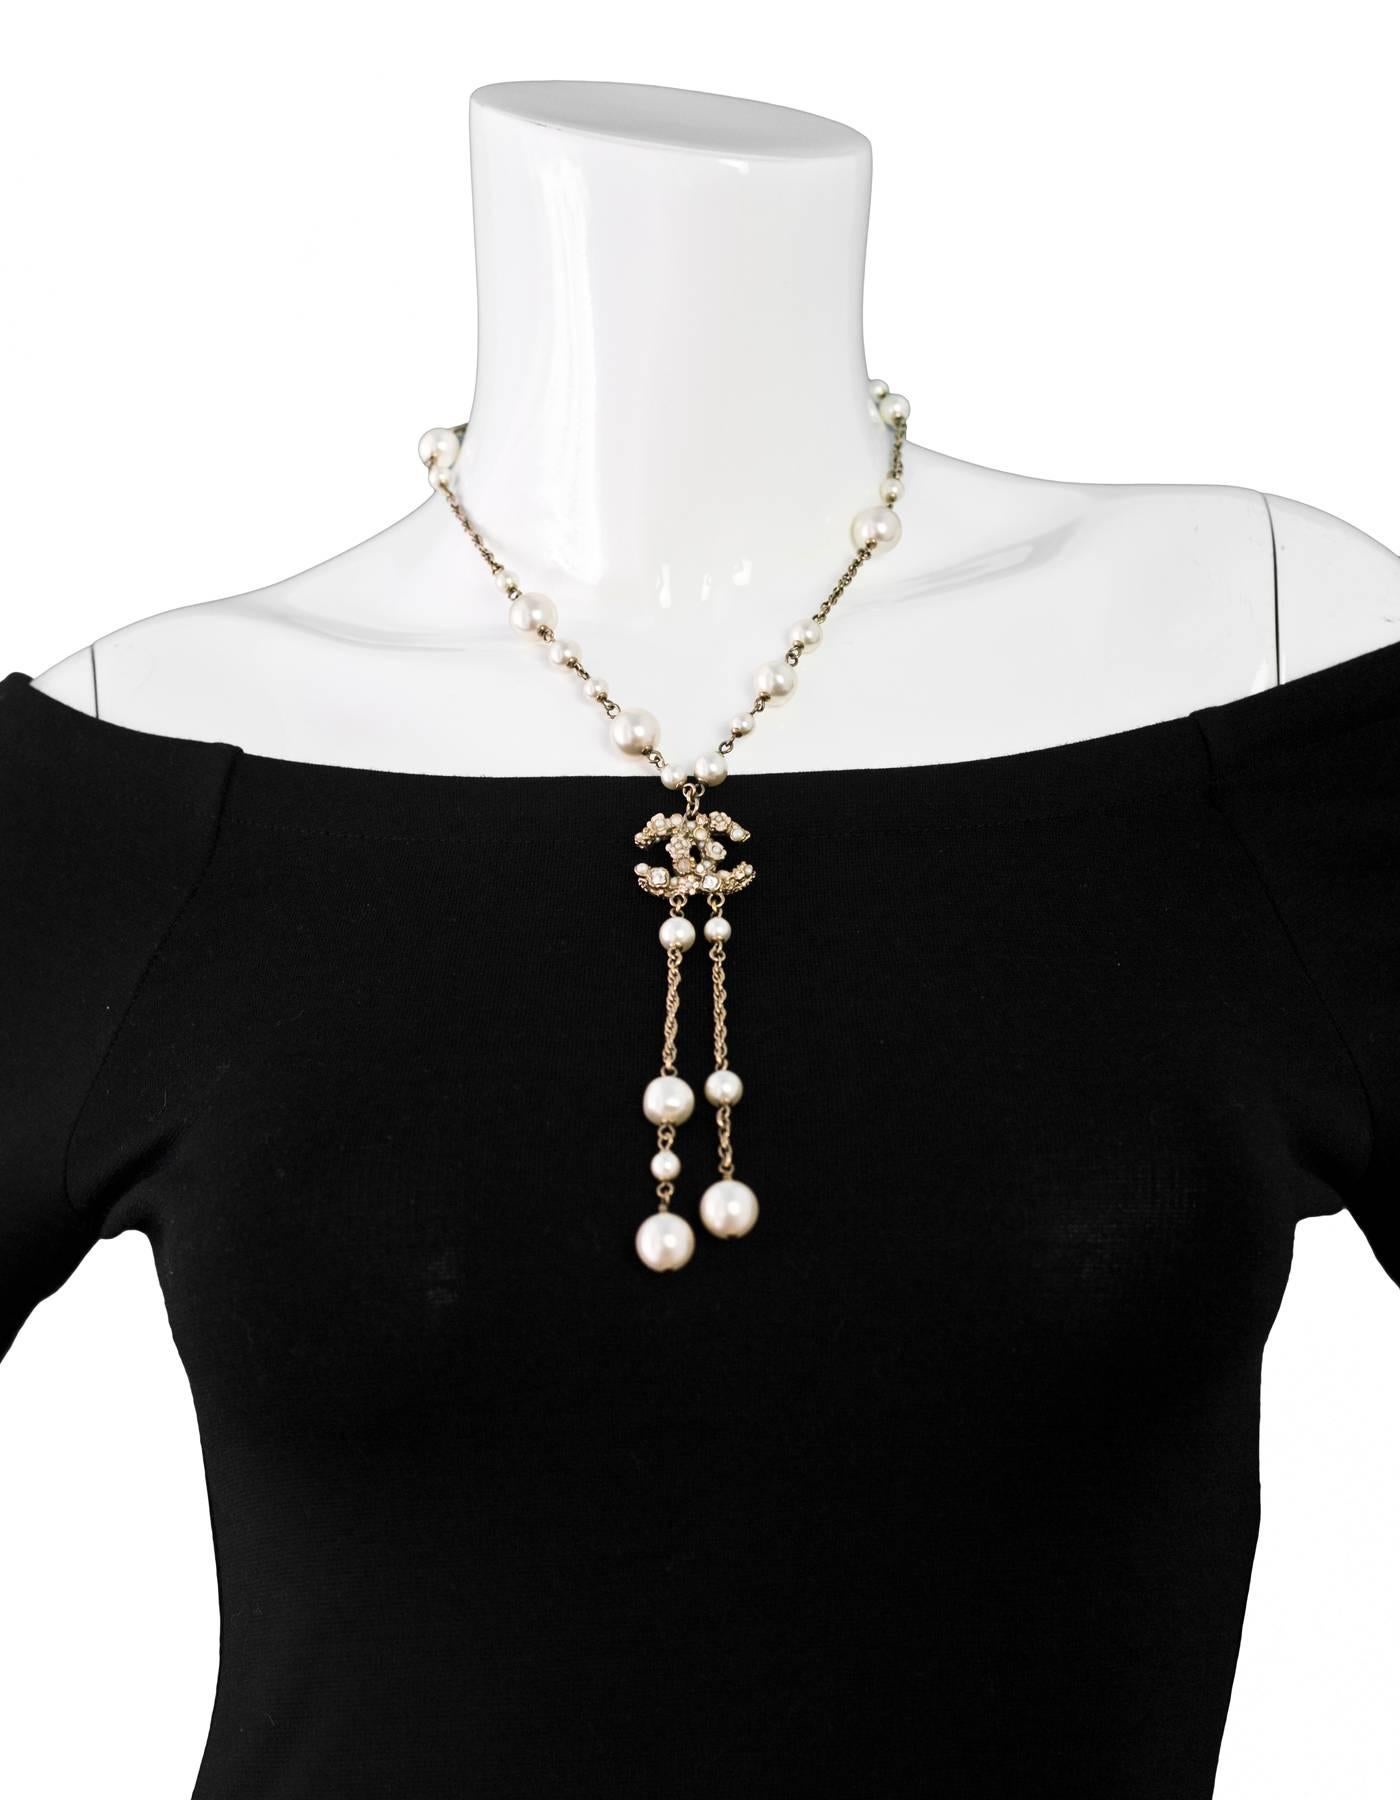 Chanel Pearl Lariat Necklace
Features floral detail at CC

Made In: Italy
Year of Production: 2011
Color: Light goldtone, ivory, pink
Materials: Metal, faux pearl, enamel
Closure: Lobster clasp
Stamp: Chanel B11 CC A Made In Italy
Overall Condition: